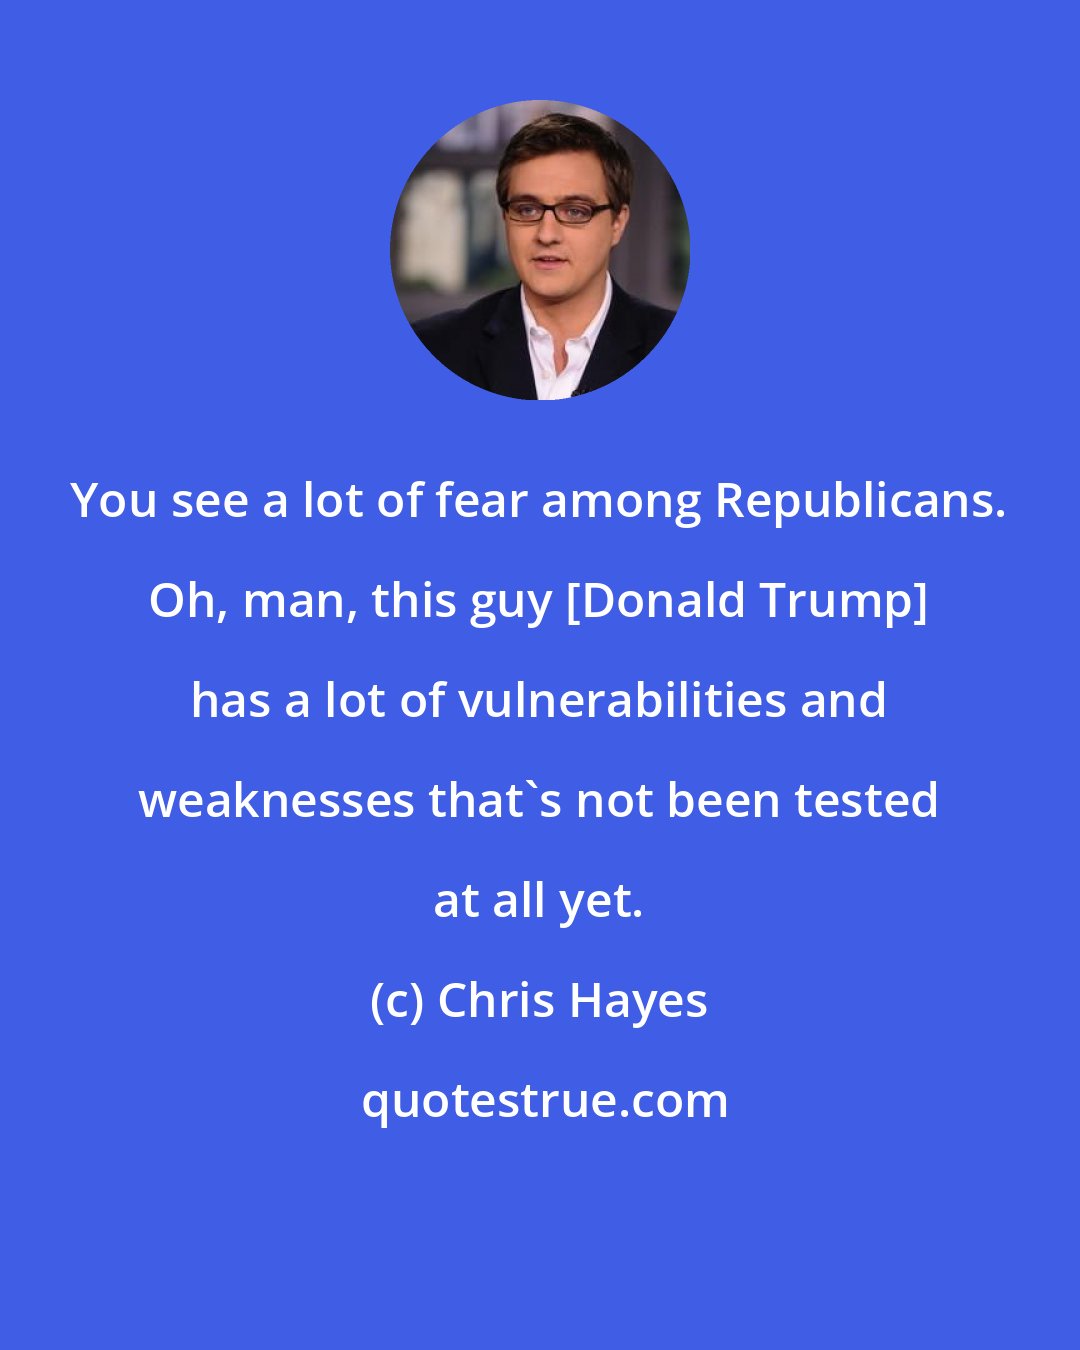 Chris Hayes: You see a lot of fear among Republicans. Oh, man, this guy [Donald Trump] has a lot of vulnerabilities and weaknesses that`s not been tested at all yet.